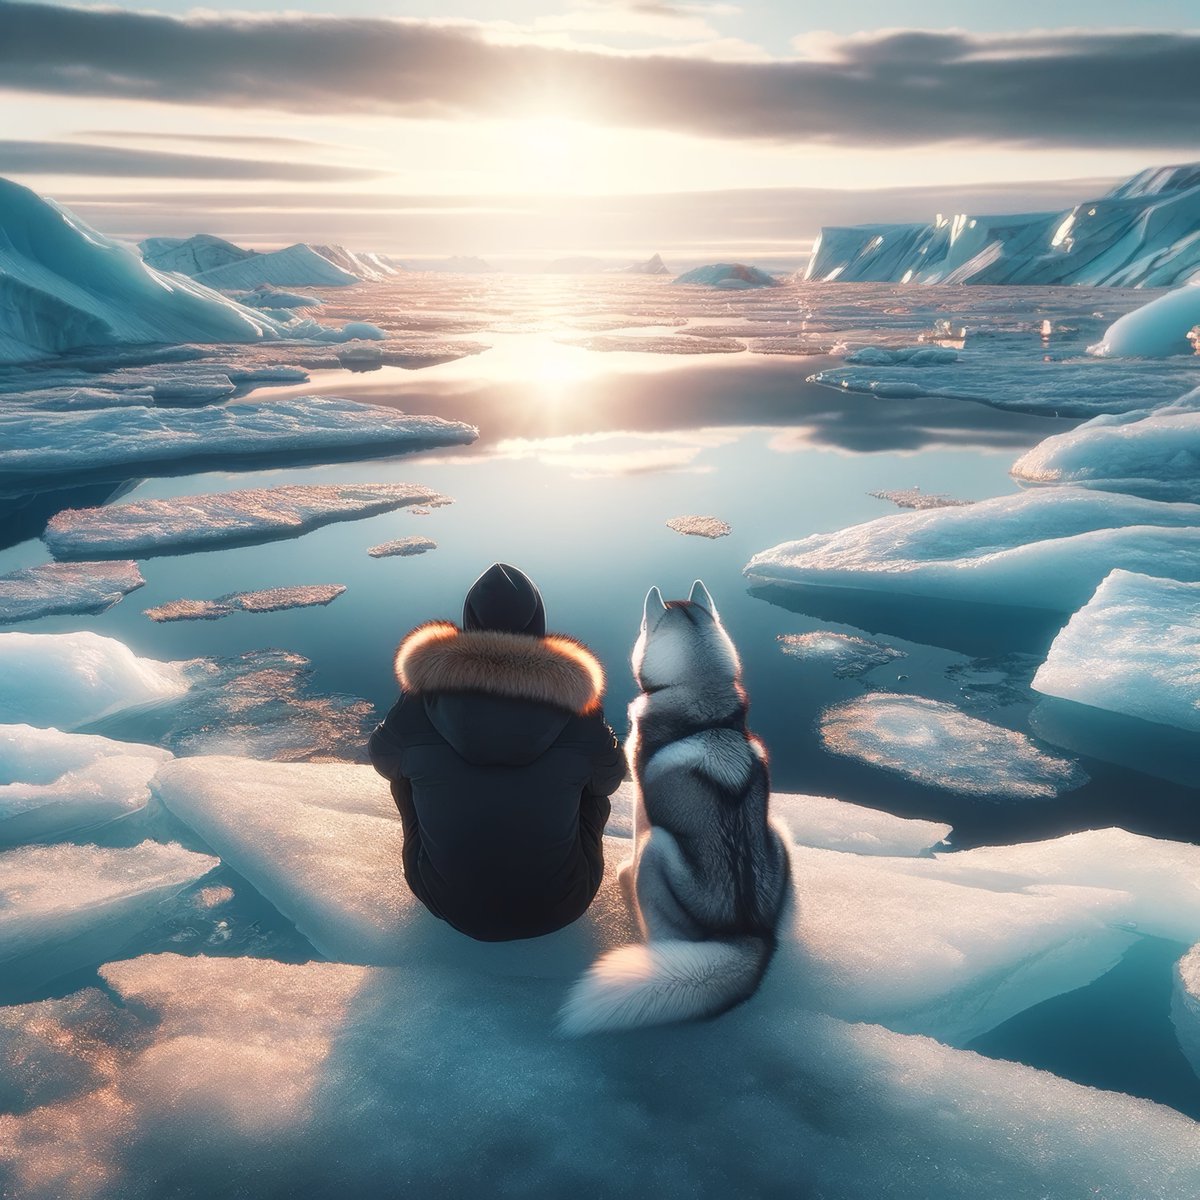 Good Afternoon! ☀️ Today, the Arctic teaches us the virtue of patience. As Sisu and I sit quietly, we watch the slow dance of daylight across the melting ice. It's a beautiful reminder that life unfolds in its own time, like the ice that shapes itself anew. 🧊💧